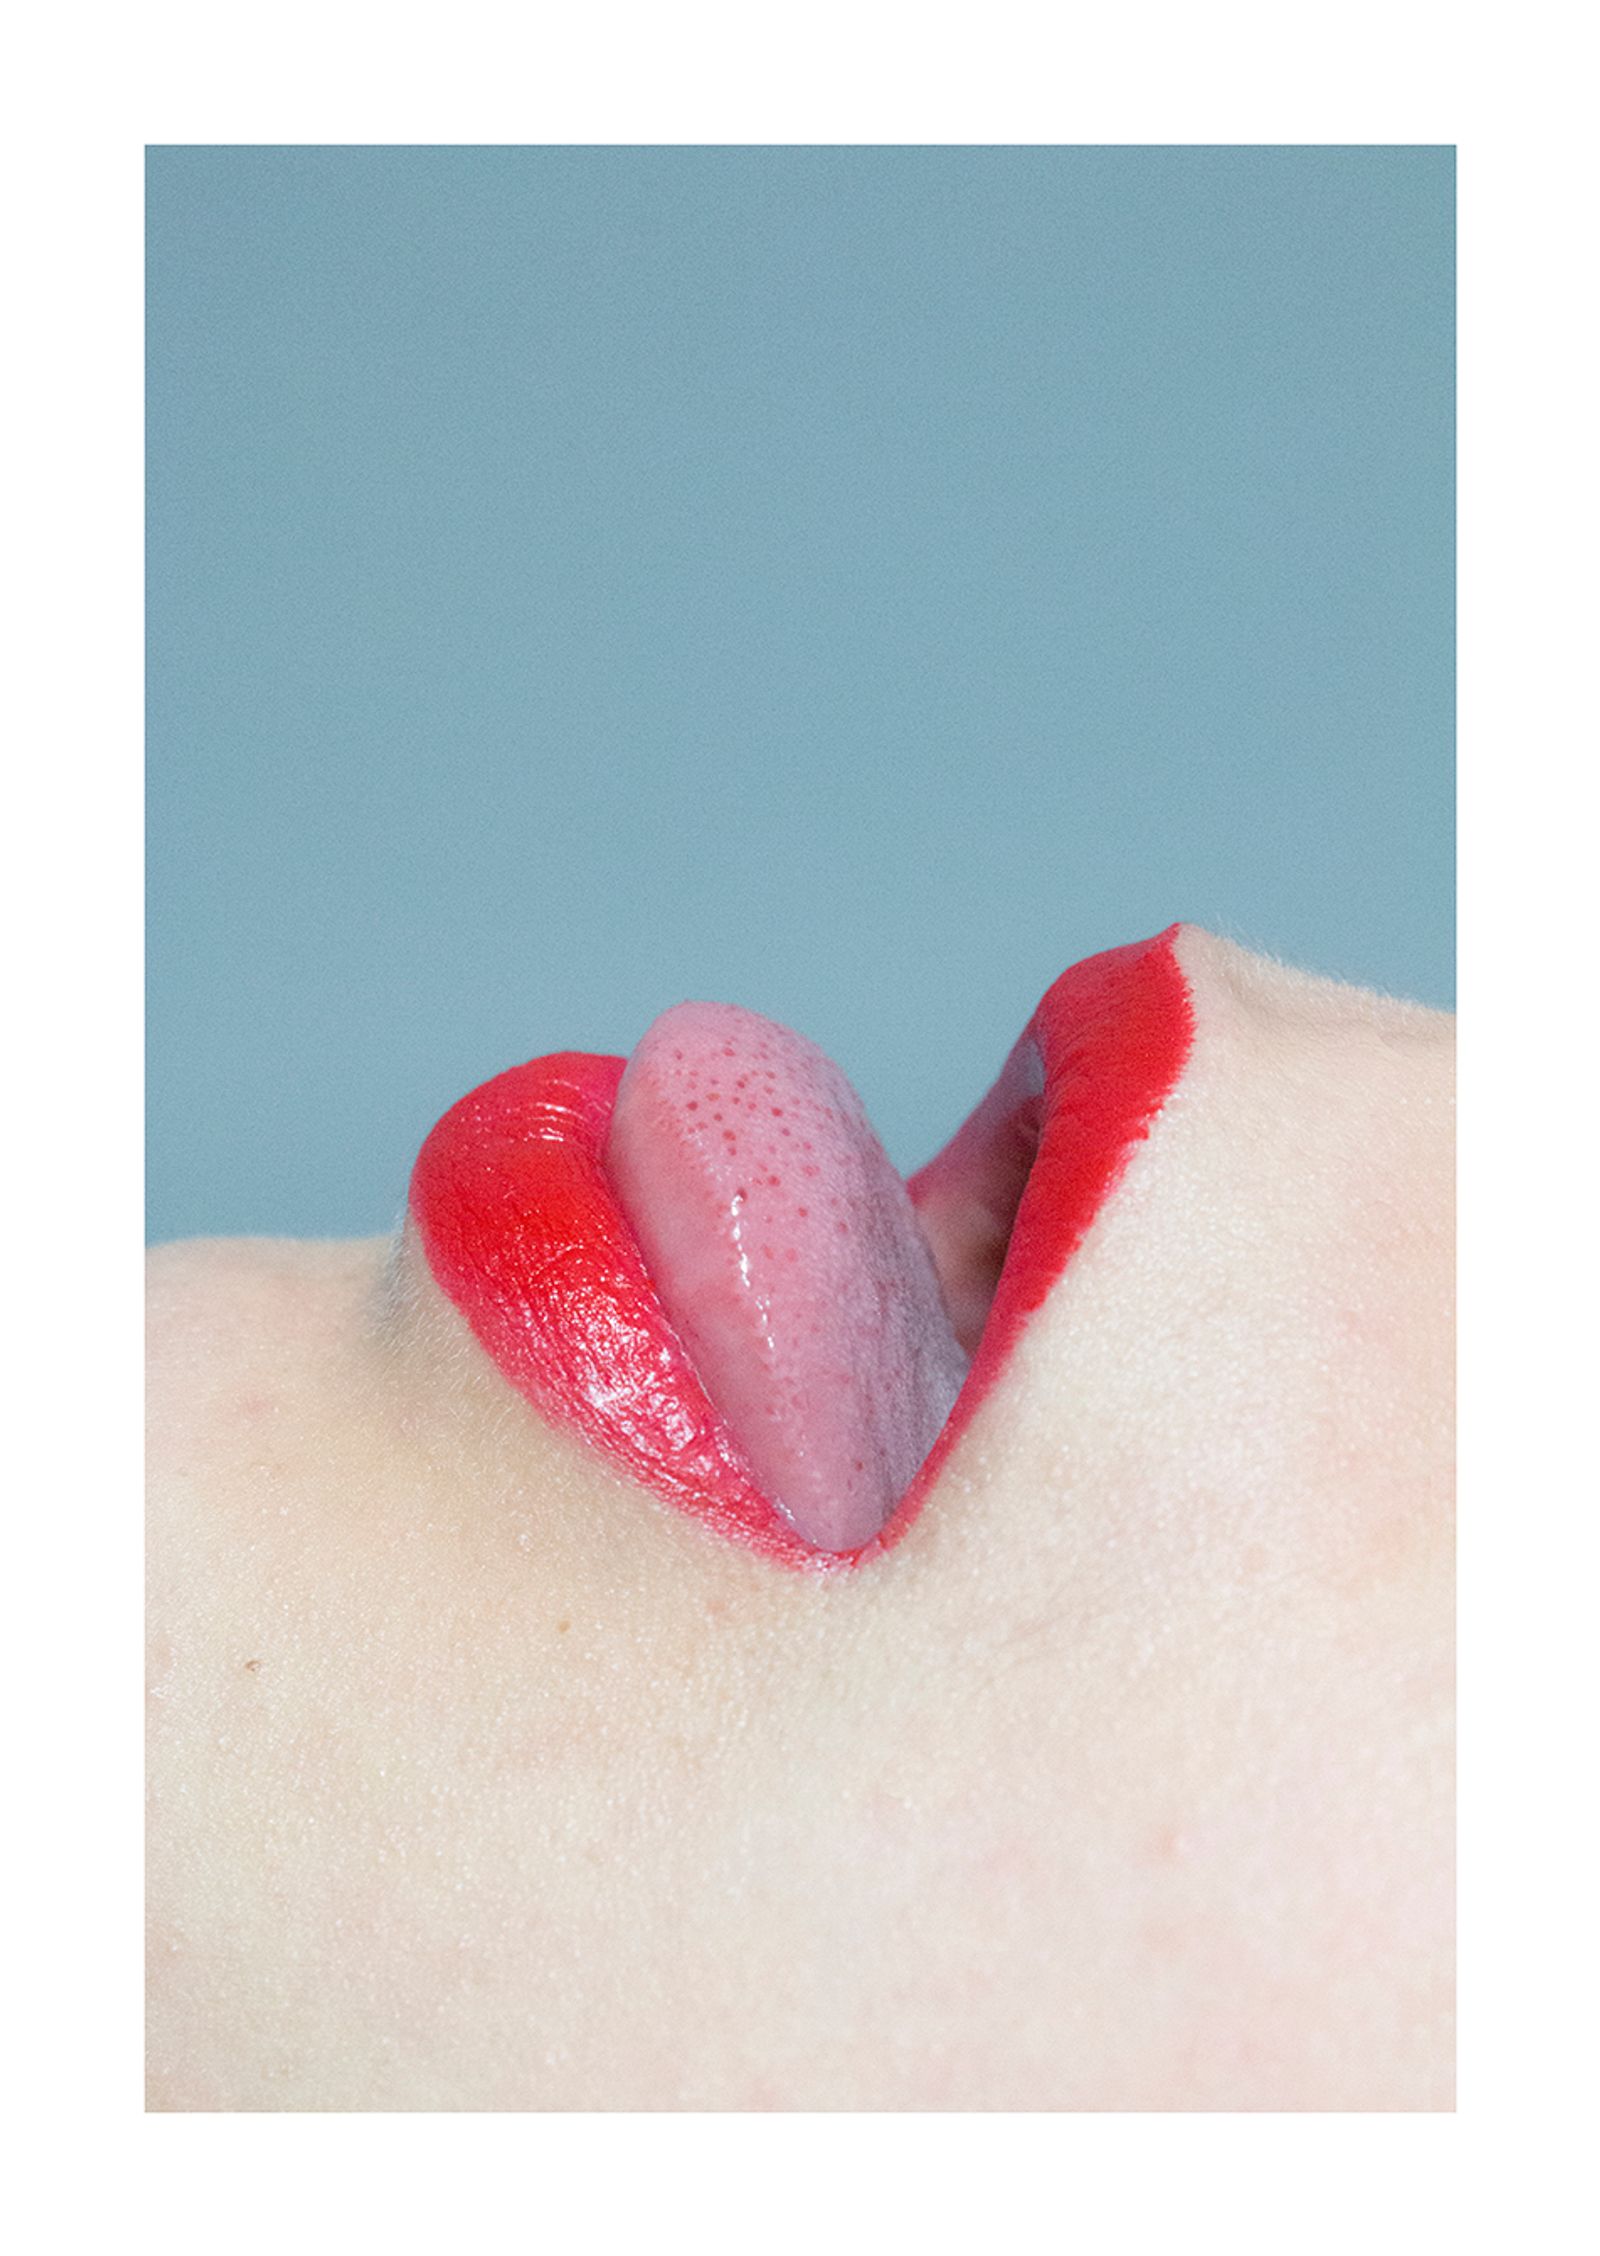 © Mitikafe  - Image from the RED/DOC - Everyone is in love except me and you photography project